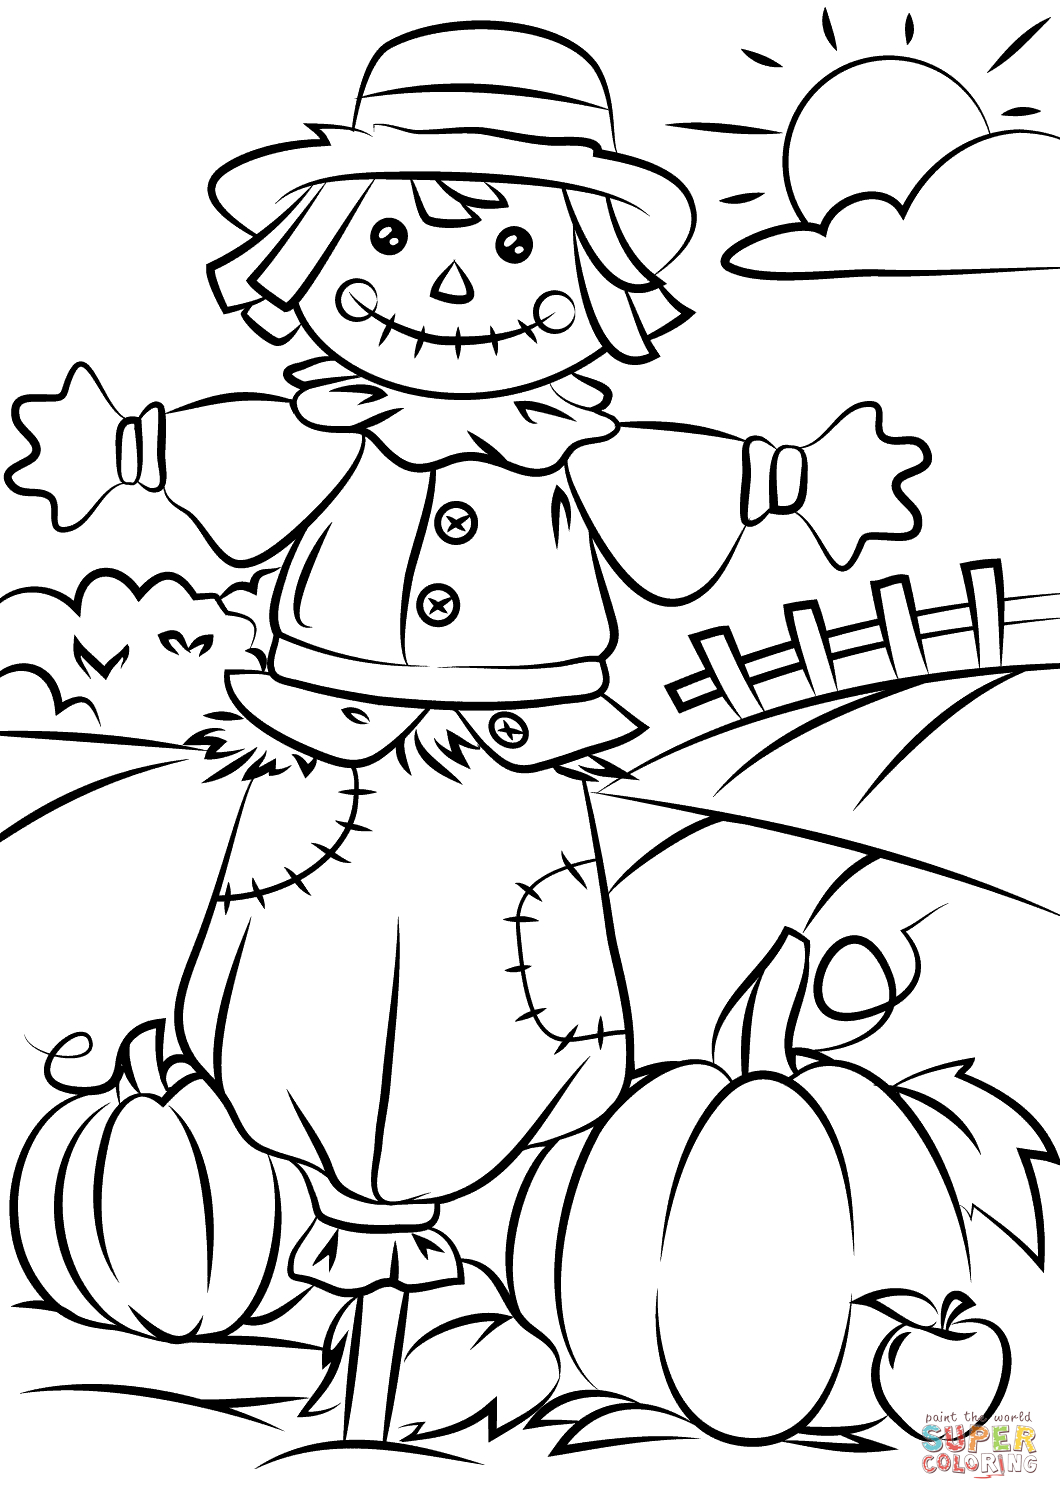 Fall Coloring Pages Free Autumn Scene With Scarecrow Coloring Page Free Printable Coloring